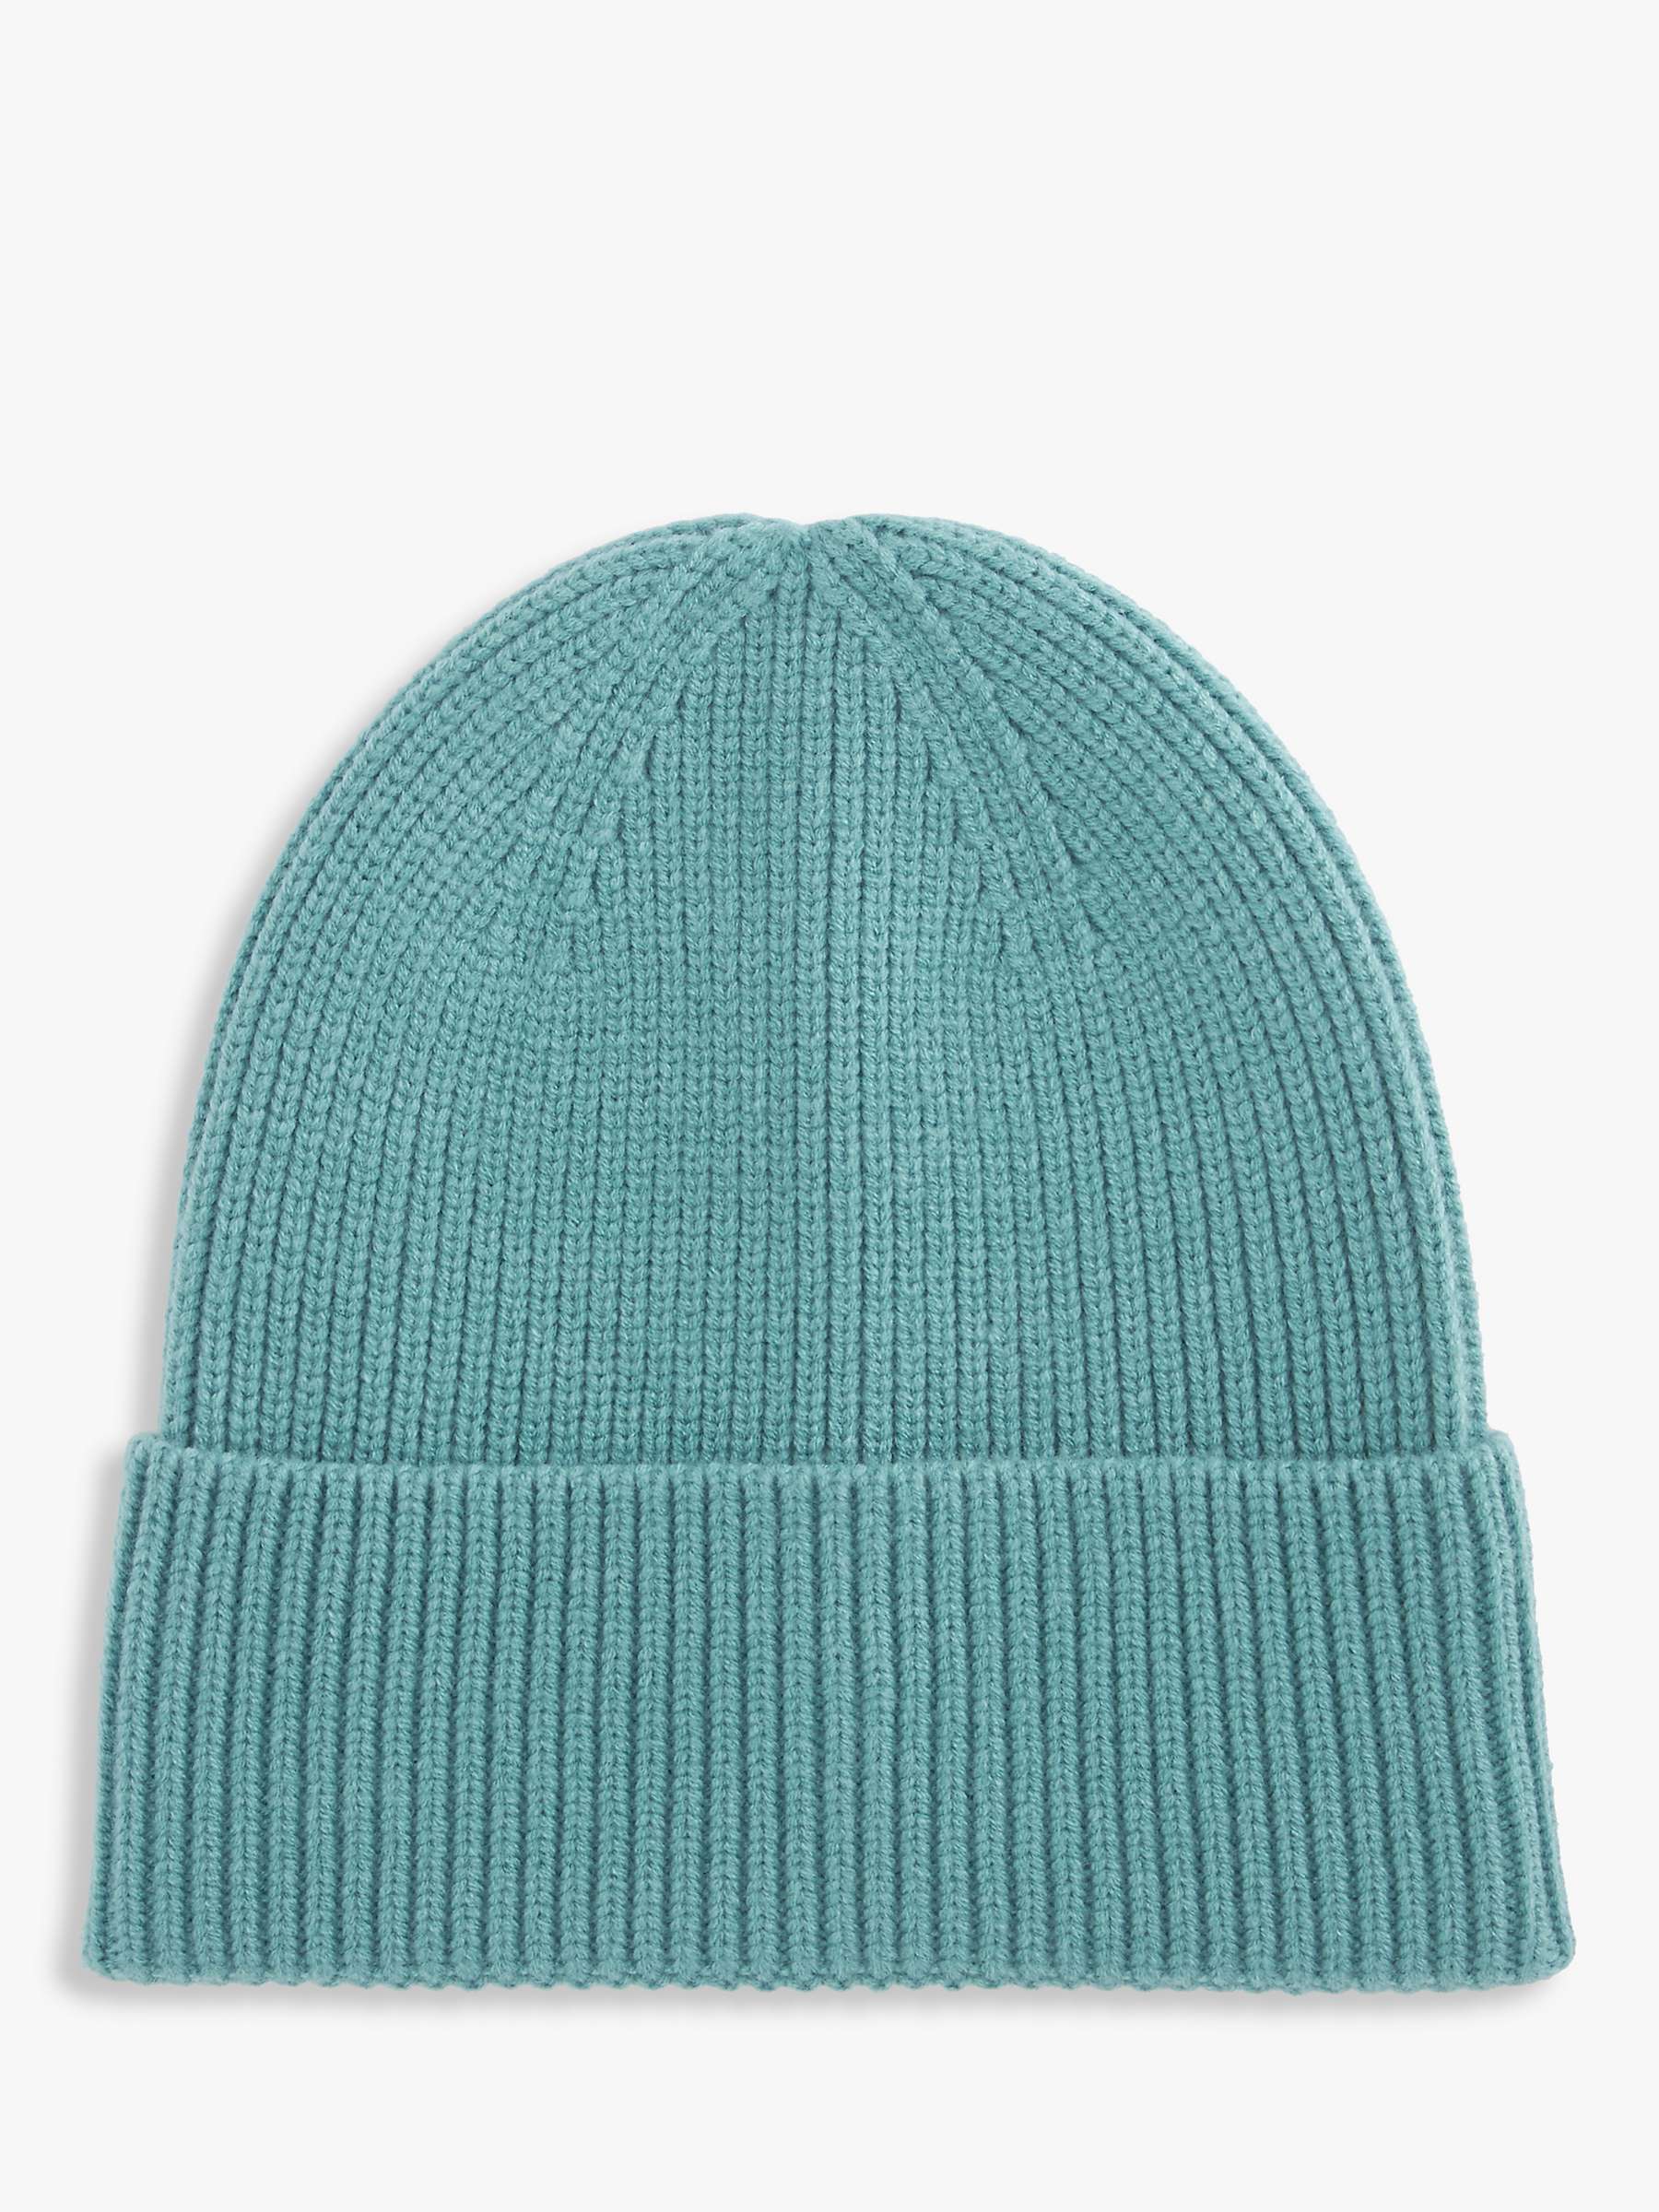 Buy John Lewis ANYDAY Knitted Beanie Online at johnlewis.com